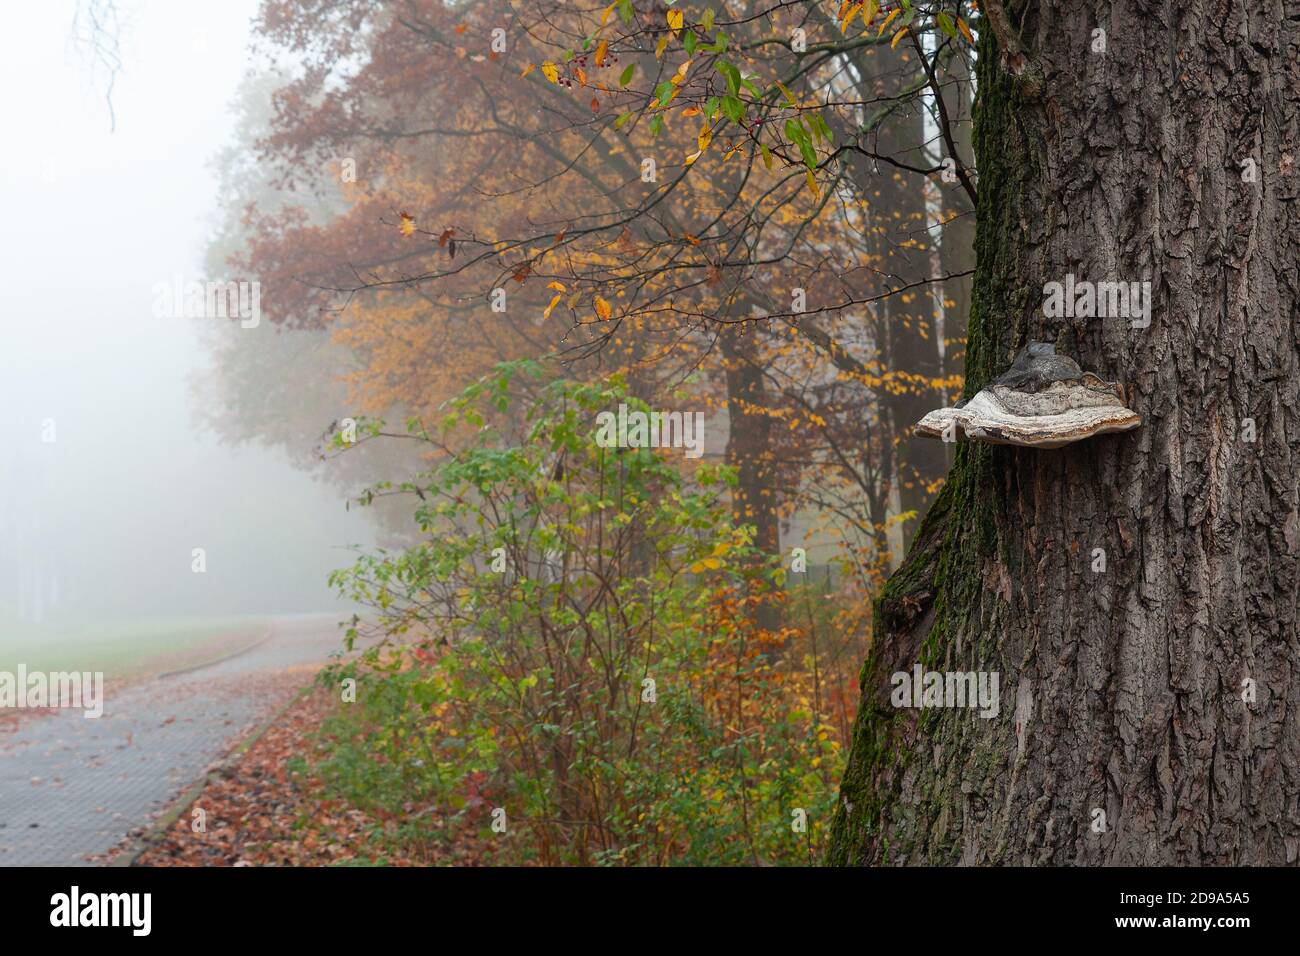 Tree trunk with chaga. Park alley in the fog. Autumn, misty morning. November landscape, Poland, Mazovia. Colorful leaves of trees. Stock Photo